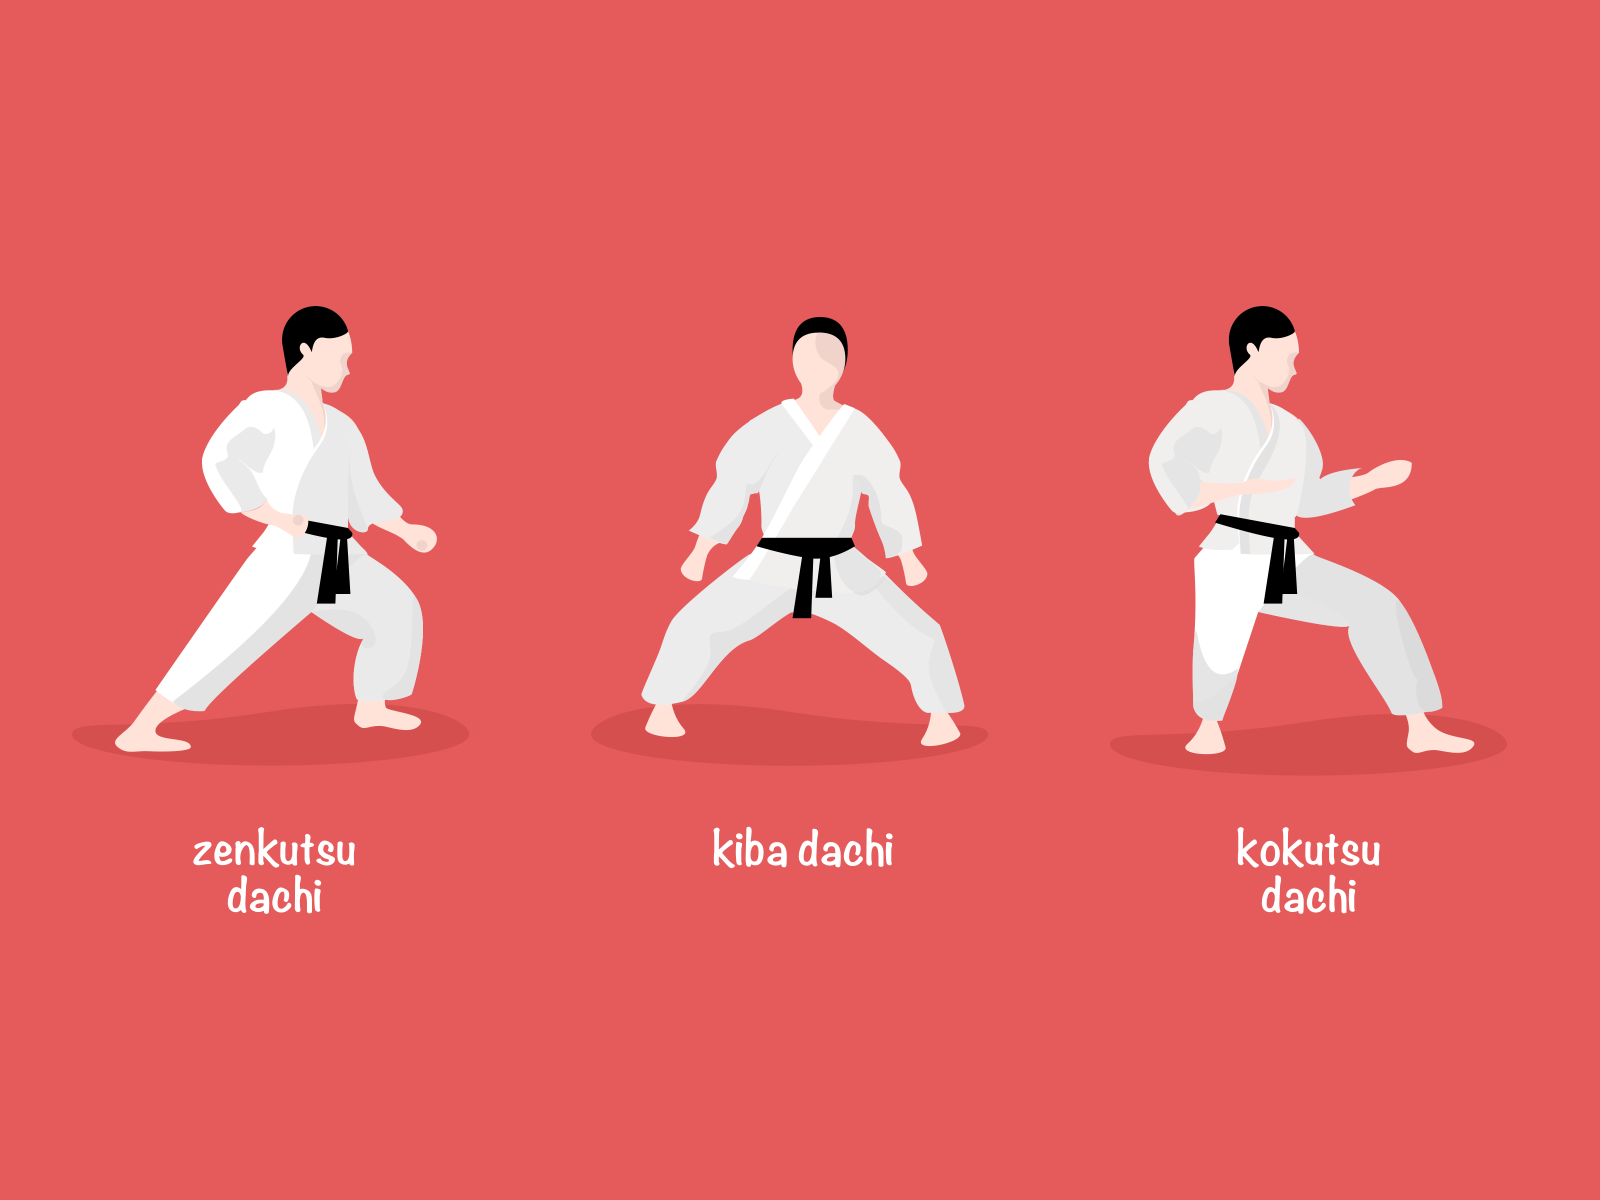 Karate Poses for Women | Martial Arts Inspiration